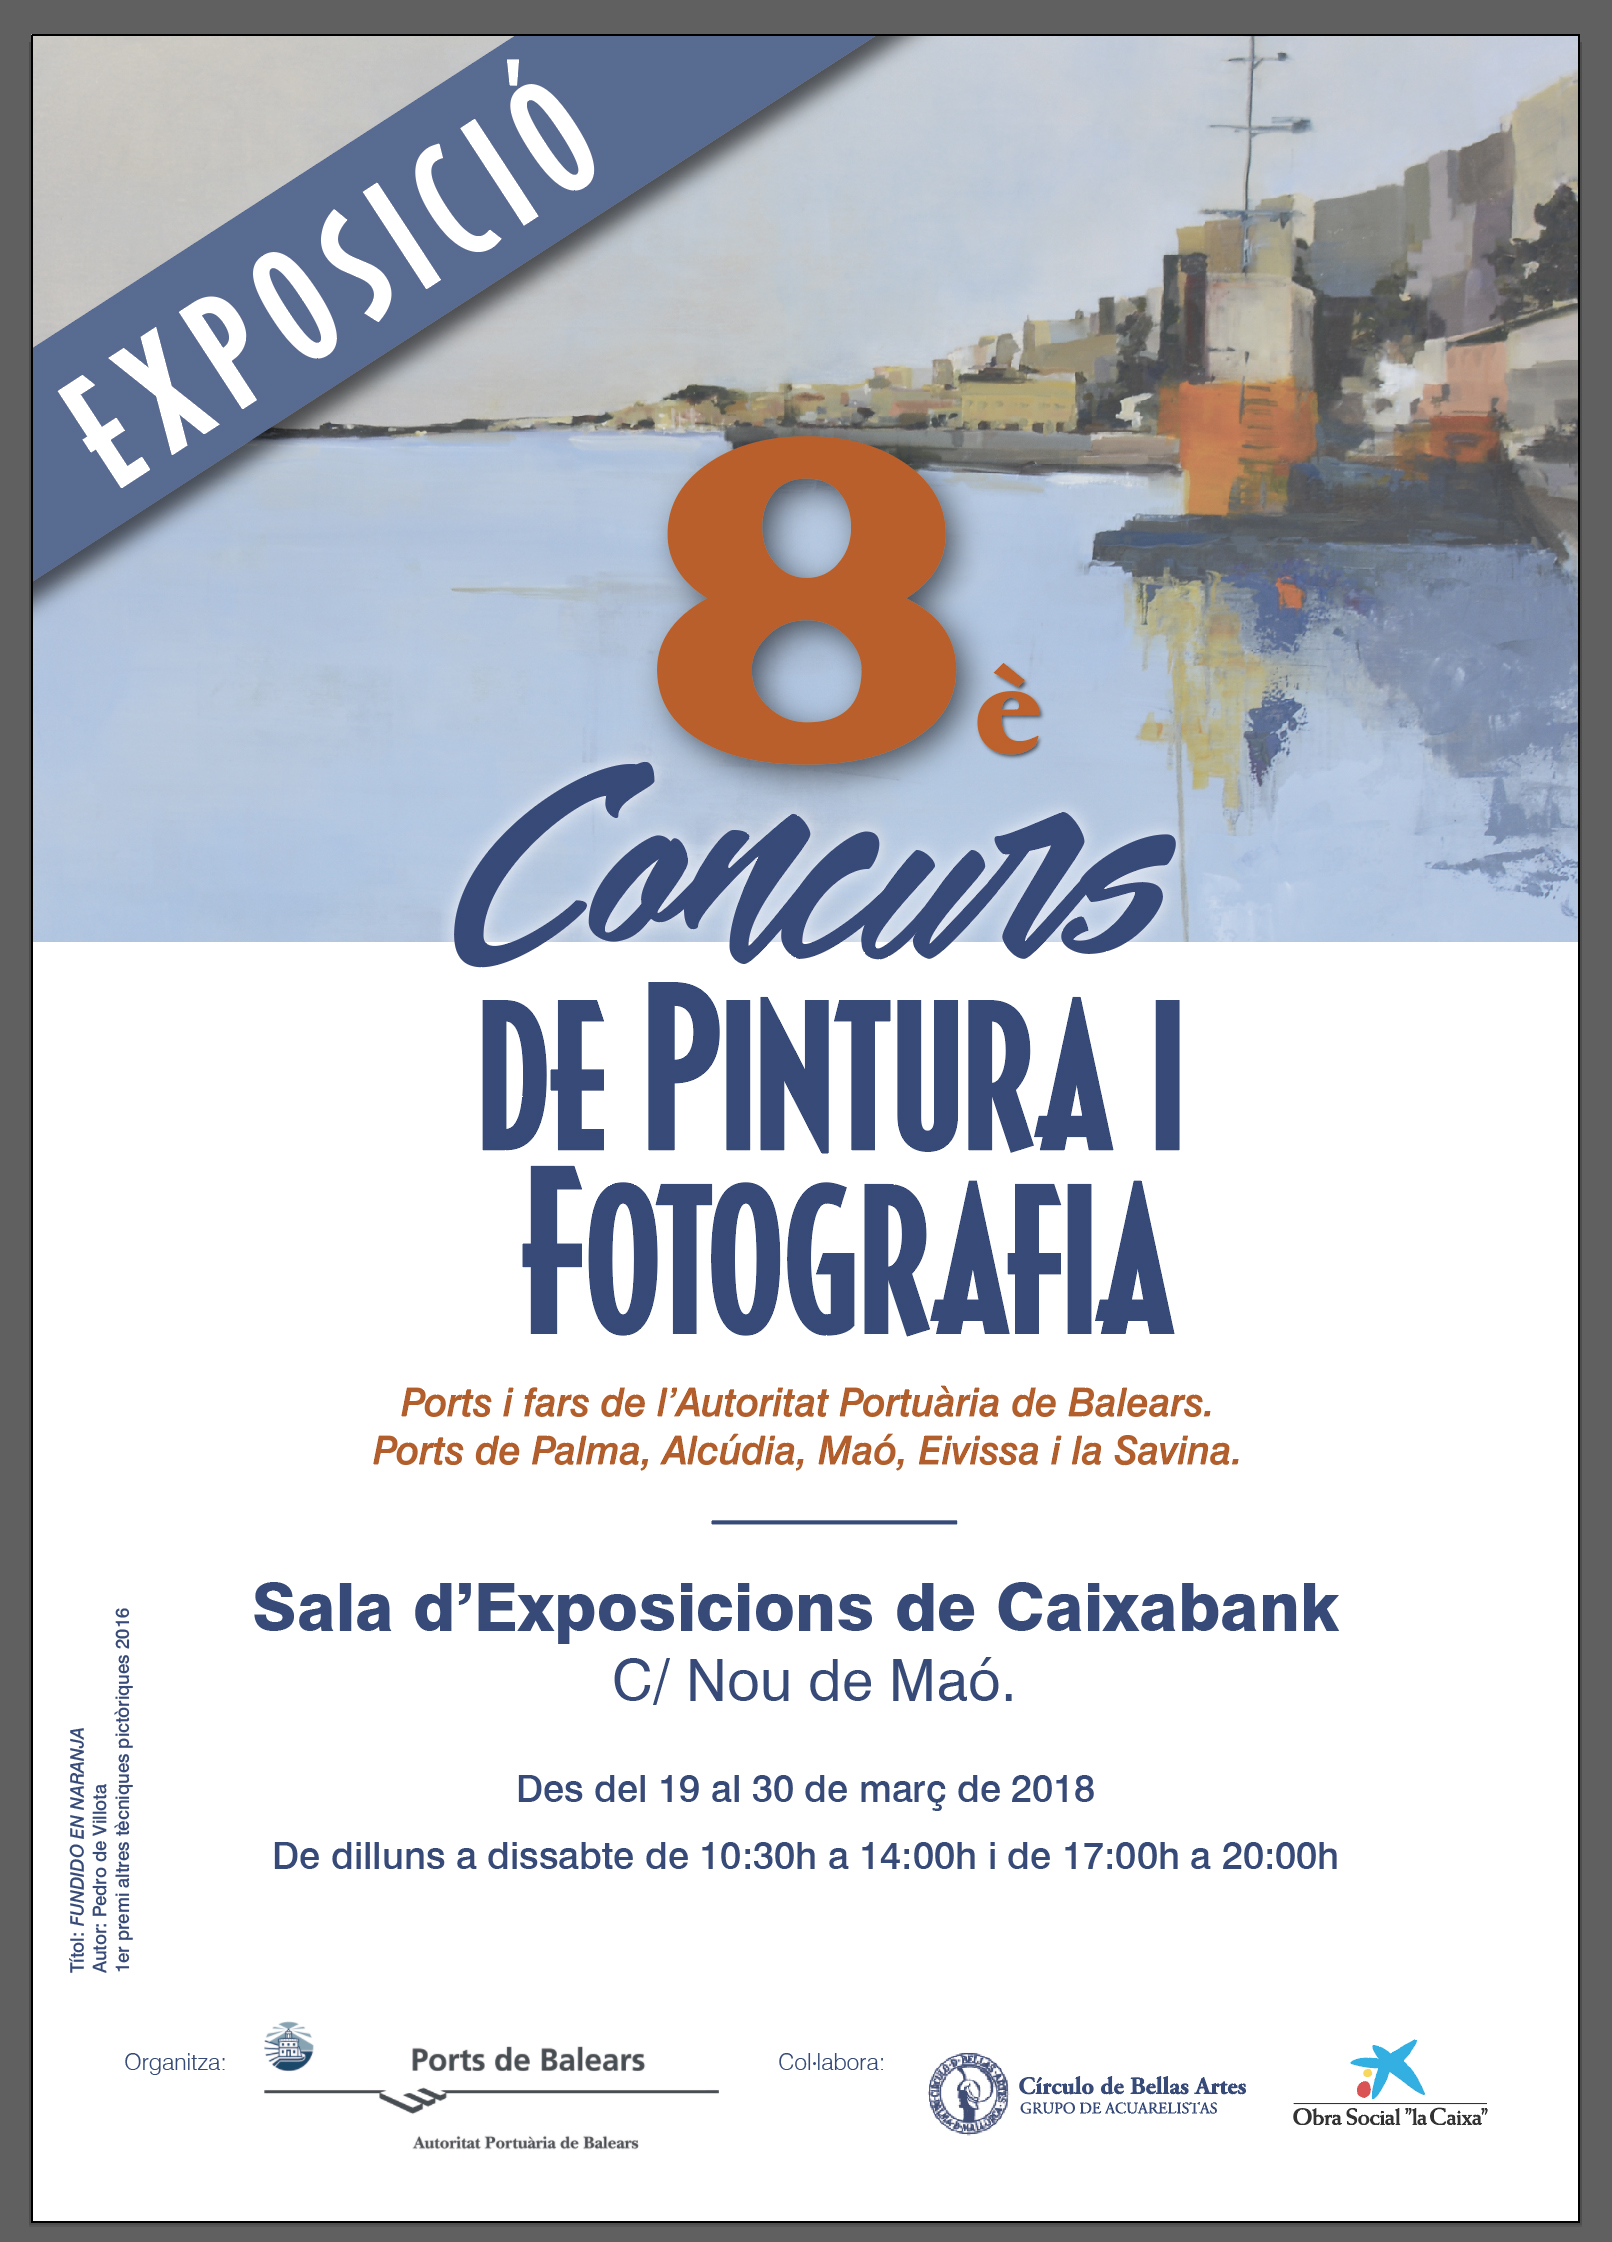 Mahon welcomes exhibition of the 8th APB Painting and Photography Contest